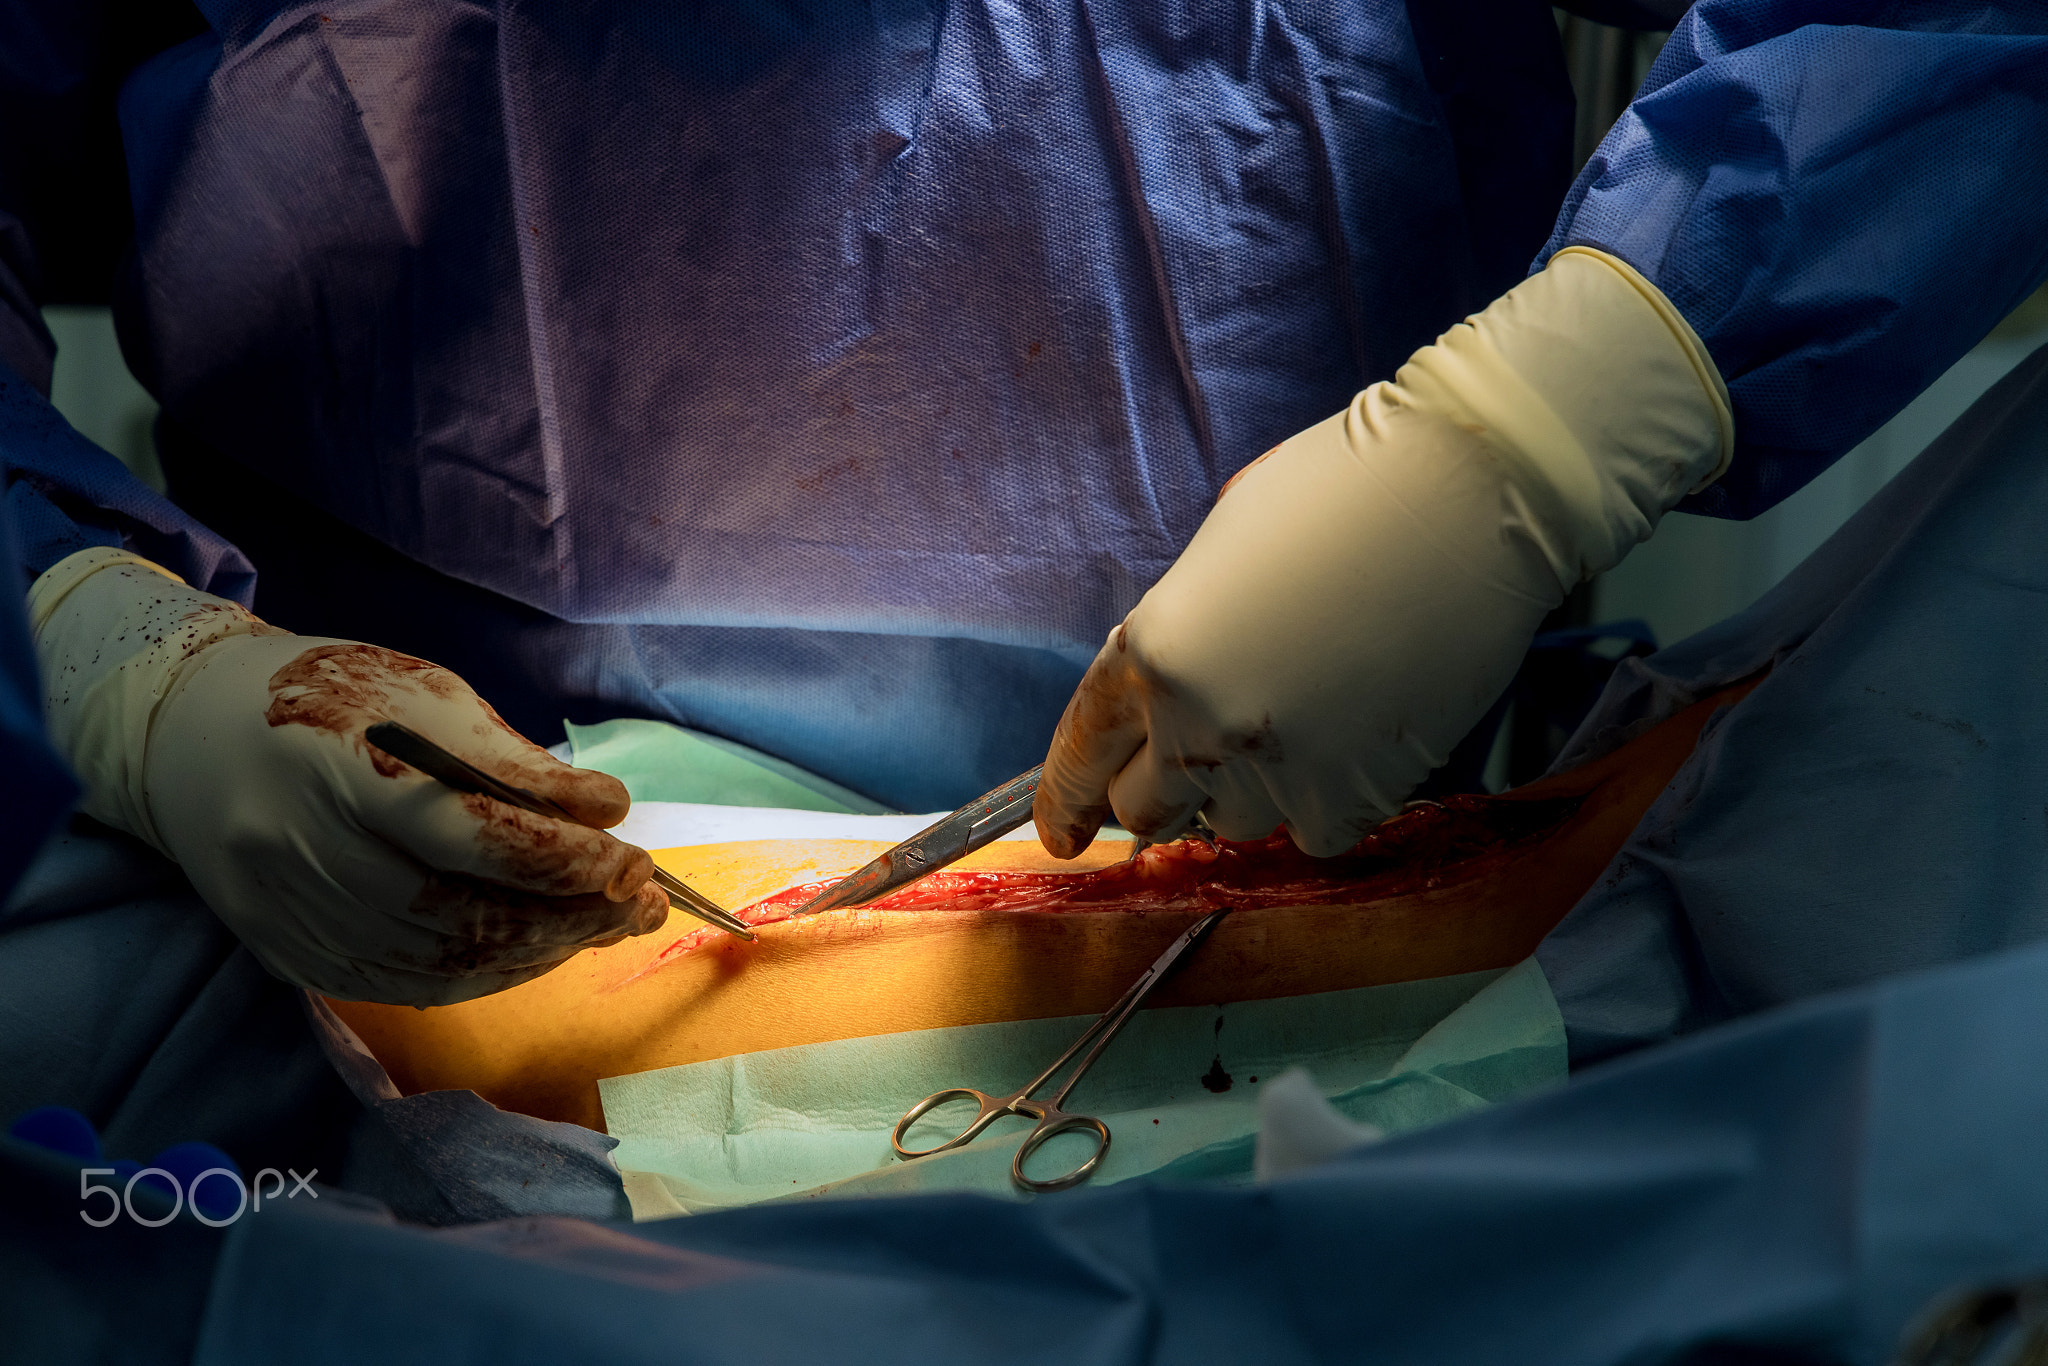 Operating during surgery with cutting legs for internal intervention